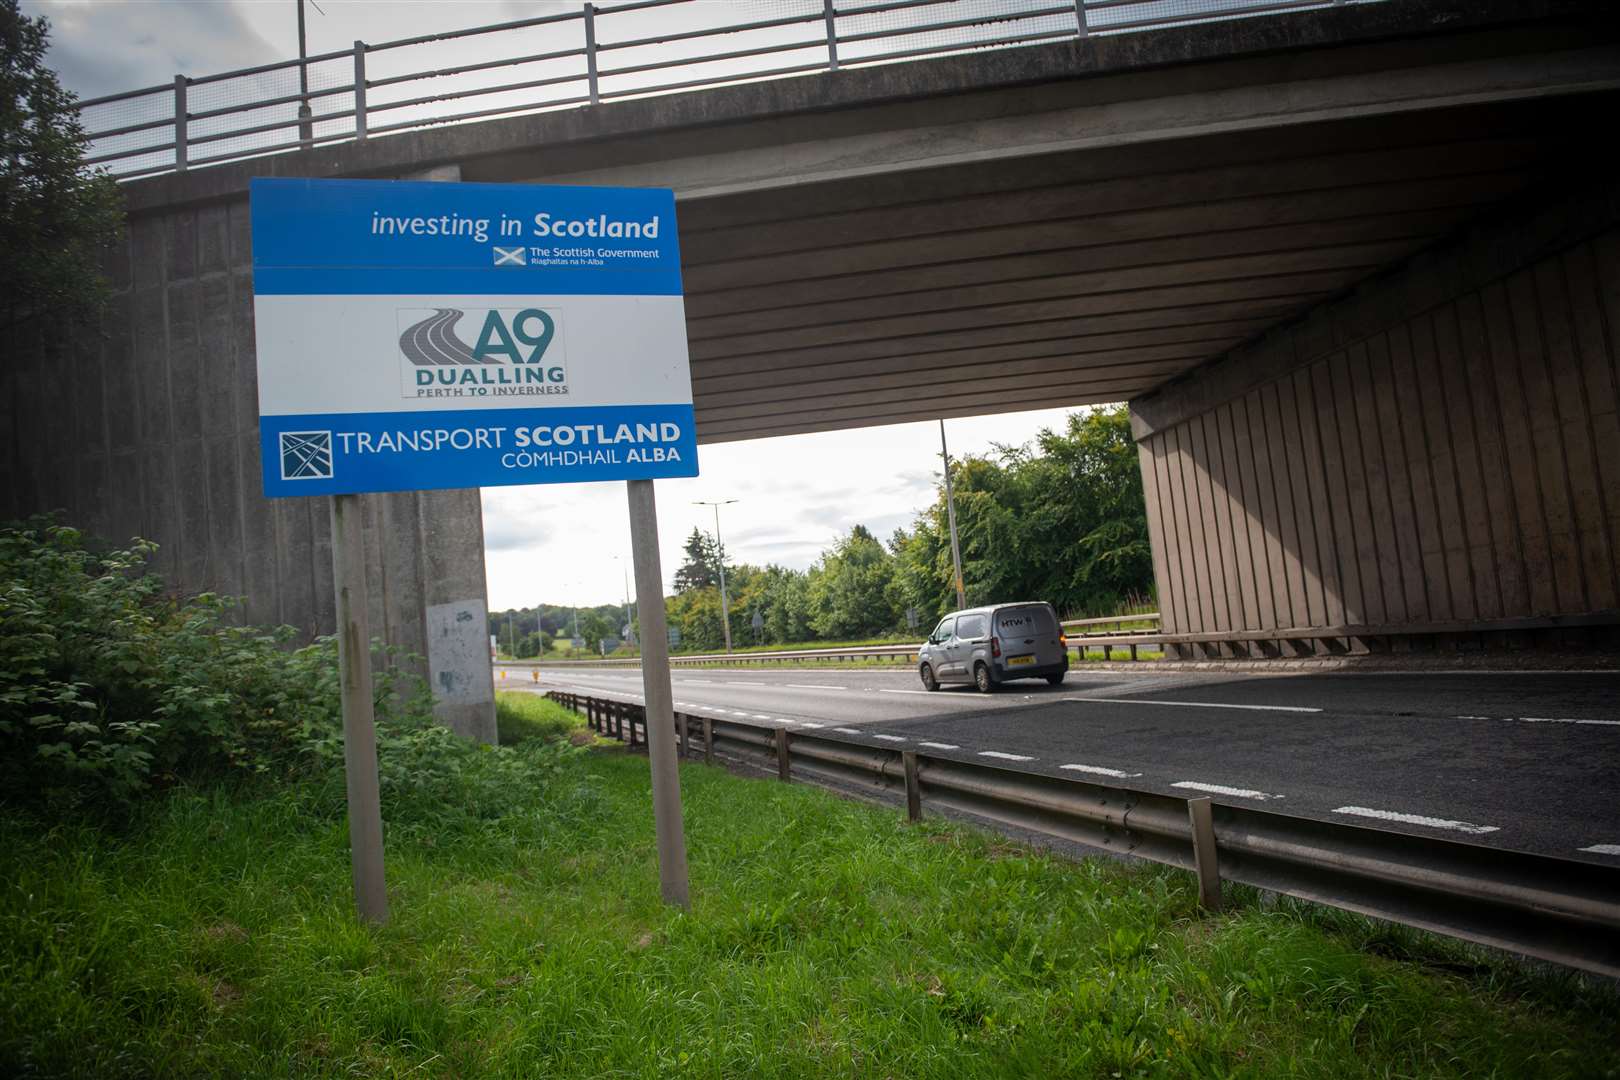 A9 dualling project sign near Inverness.